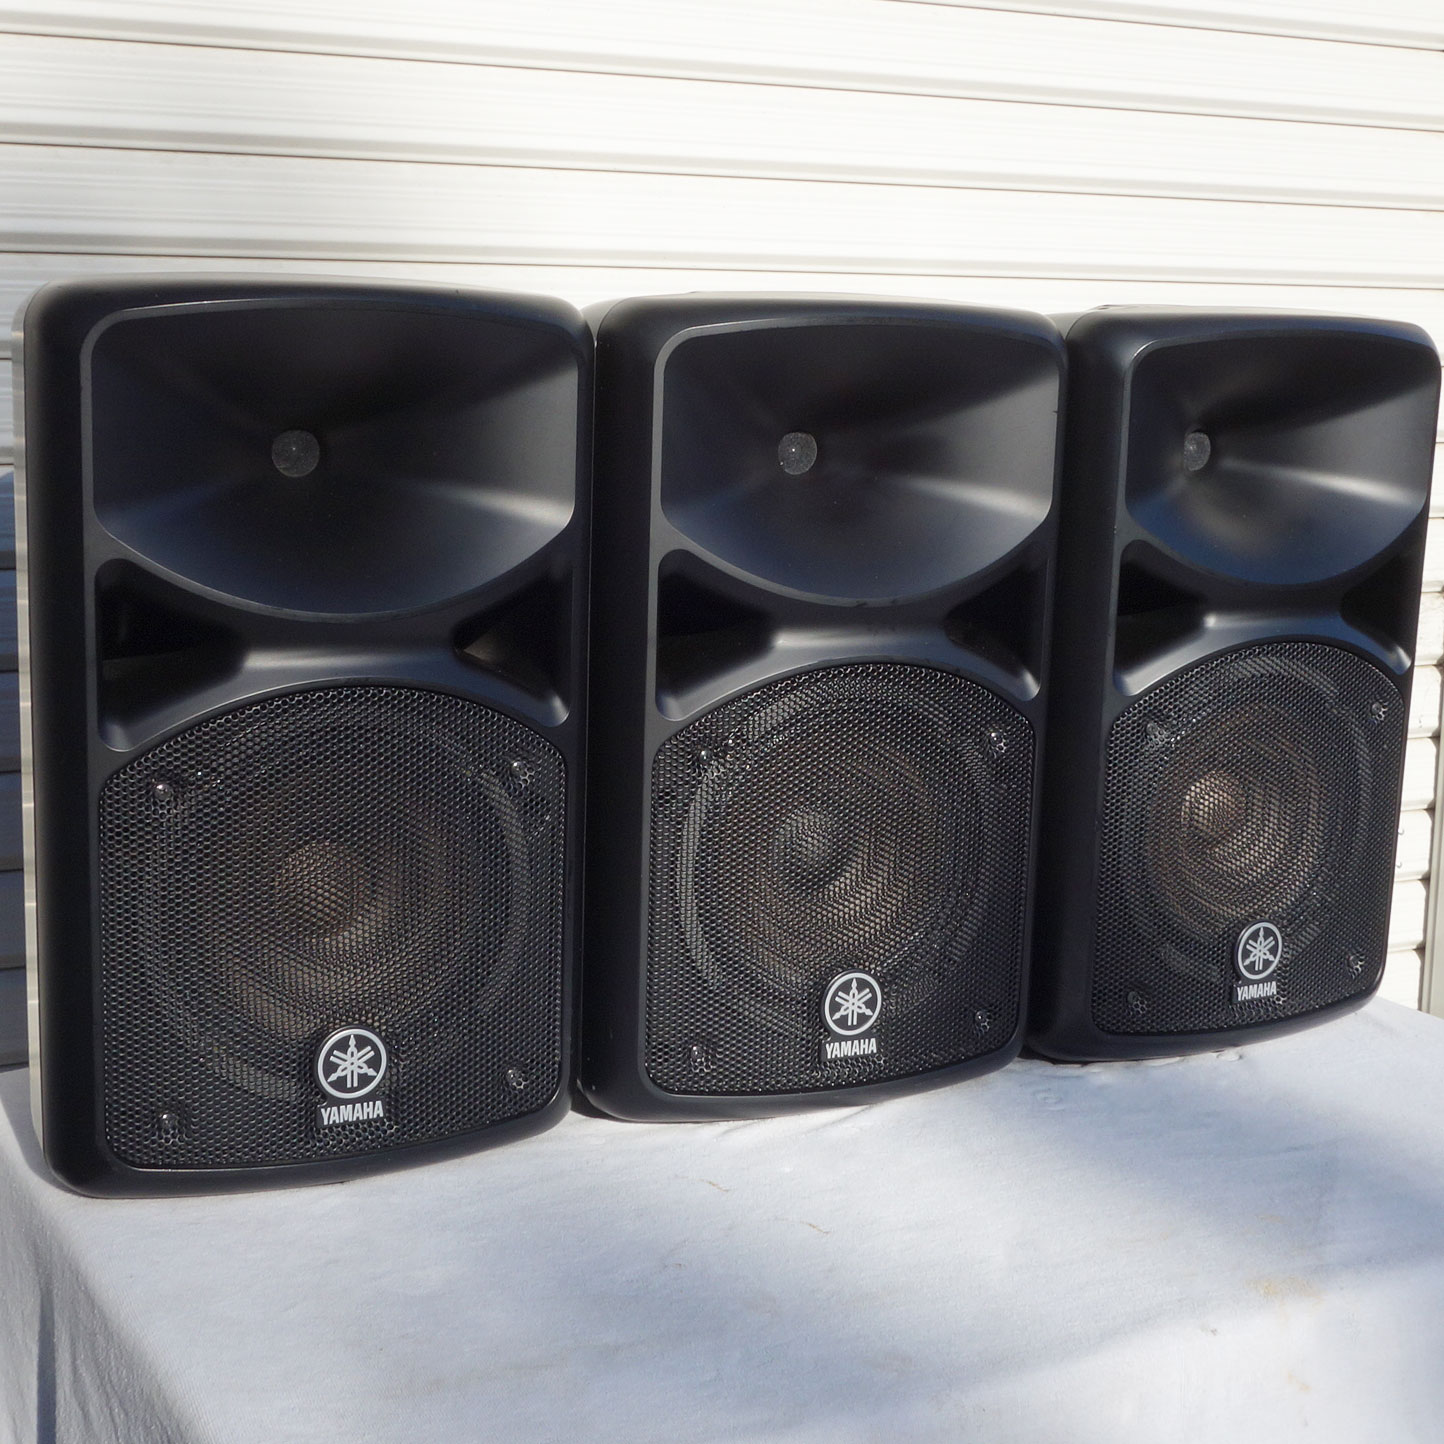 YAMAHA all-in-one type portable PA system STAGEPAS400i * SPEAKER SYSTEM400S speaker Yamaha 